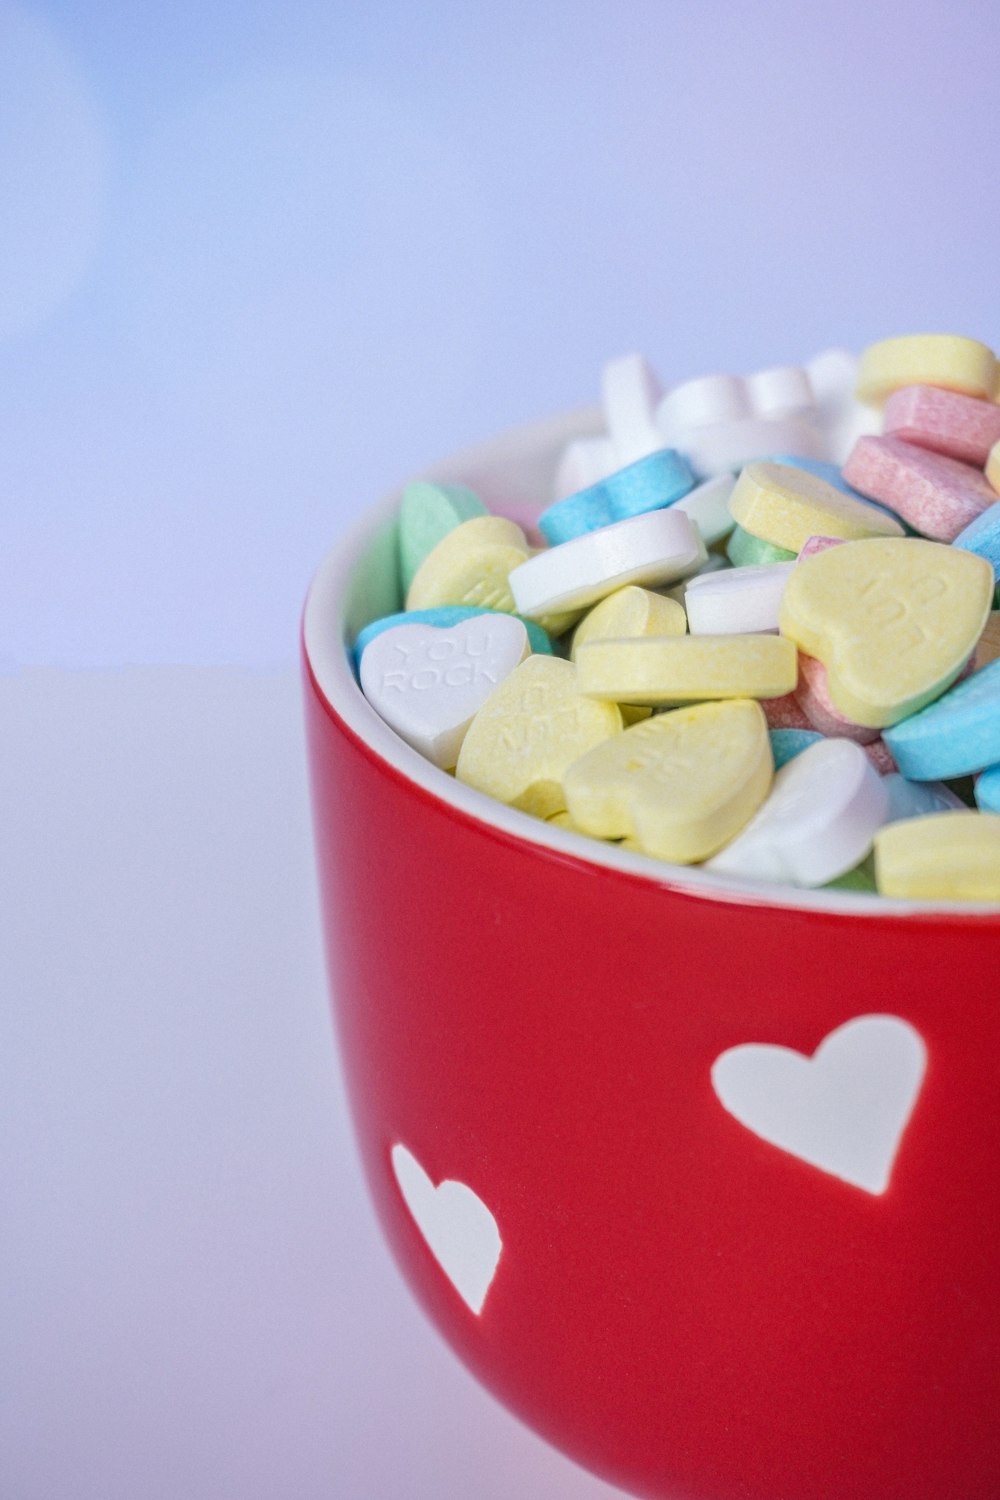 a red bowl filled with lots of candy hearts